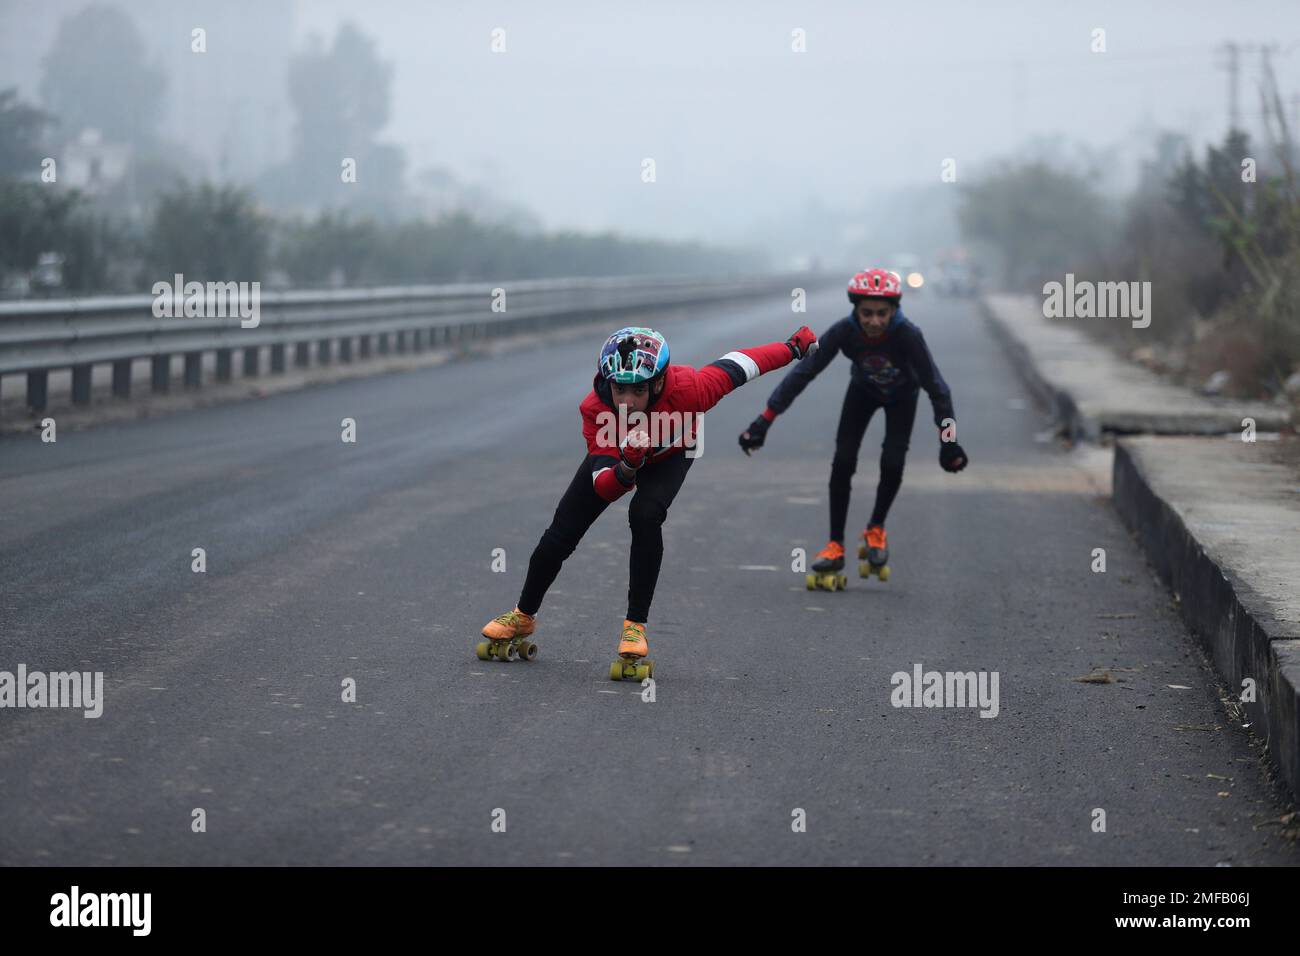 Boys skate on a road during a cold and foggy morning in Jammu, India,  Saturday, Jan. 9, 2021. Dense fog has disrupted rail, road and air traffic  in many parts of northern